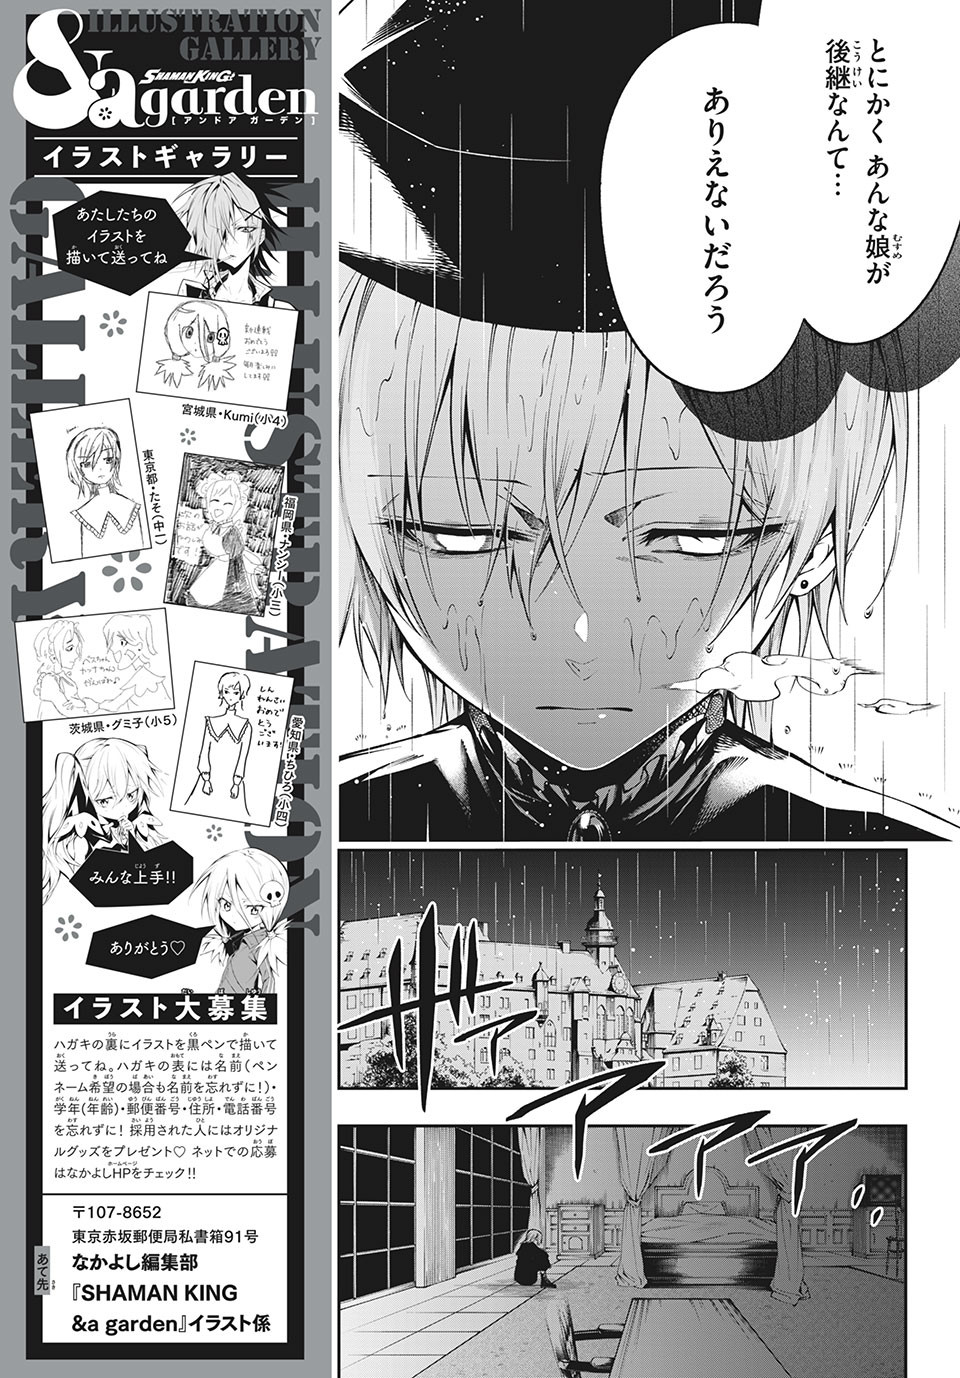 Shaman King: and a garden 第3.3話 - Page 4